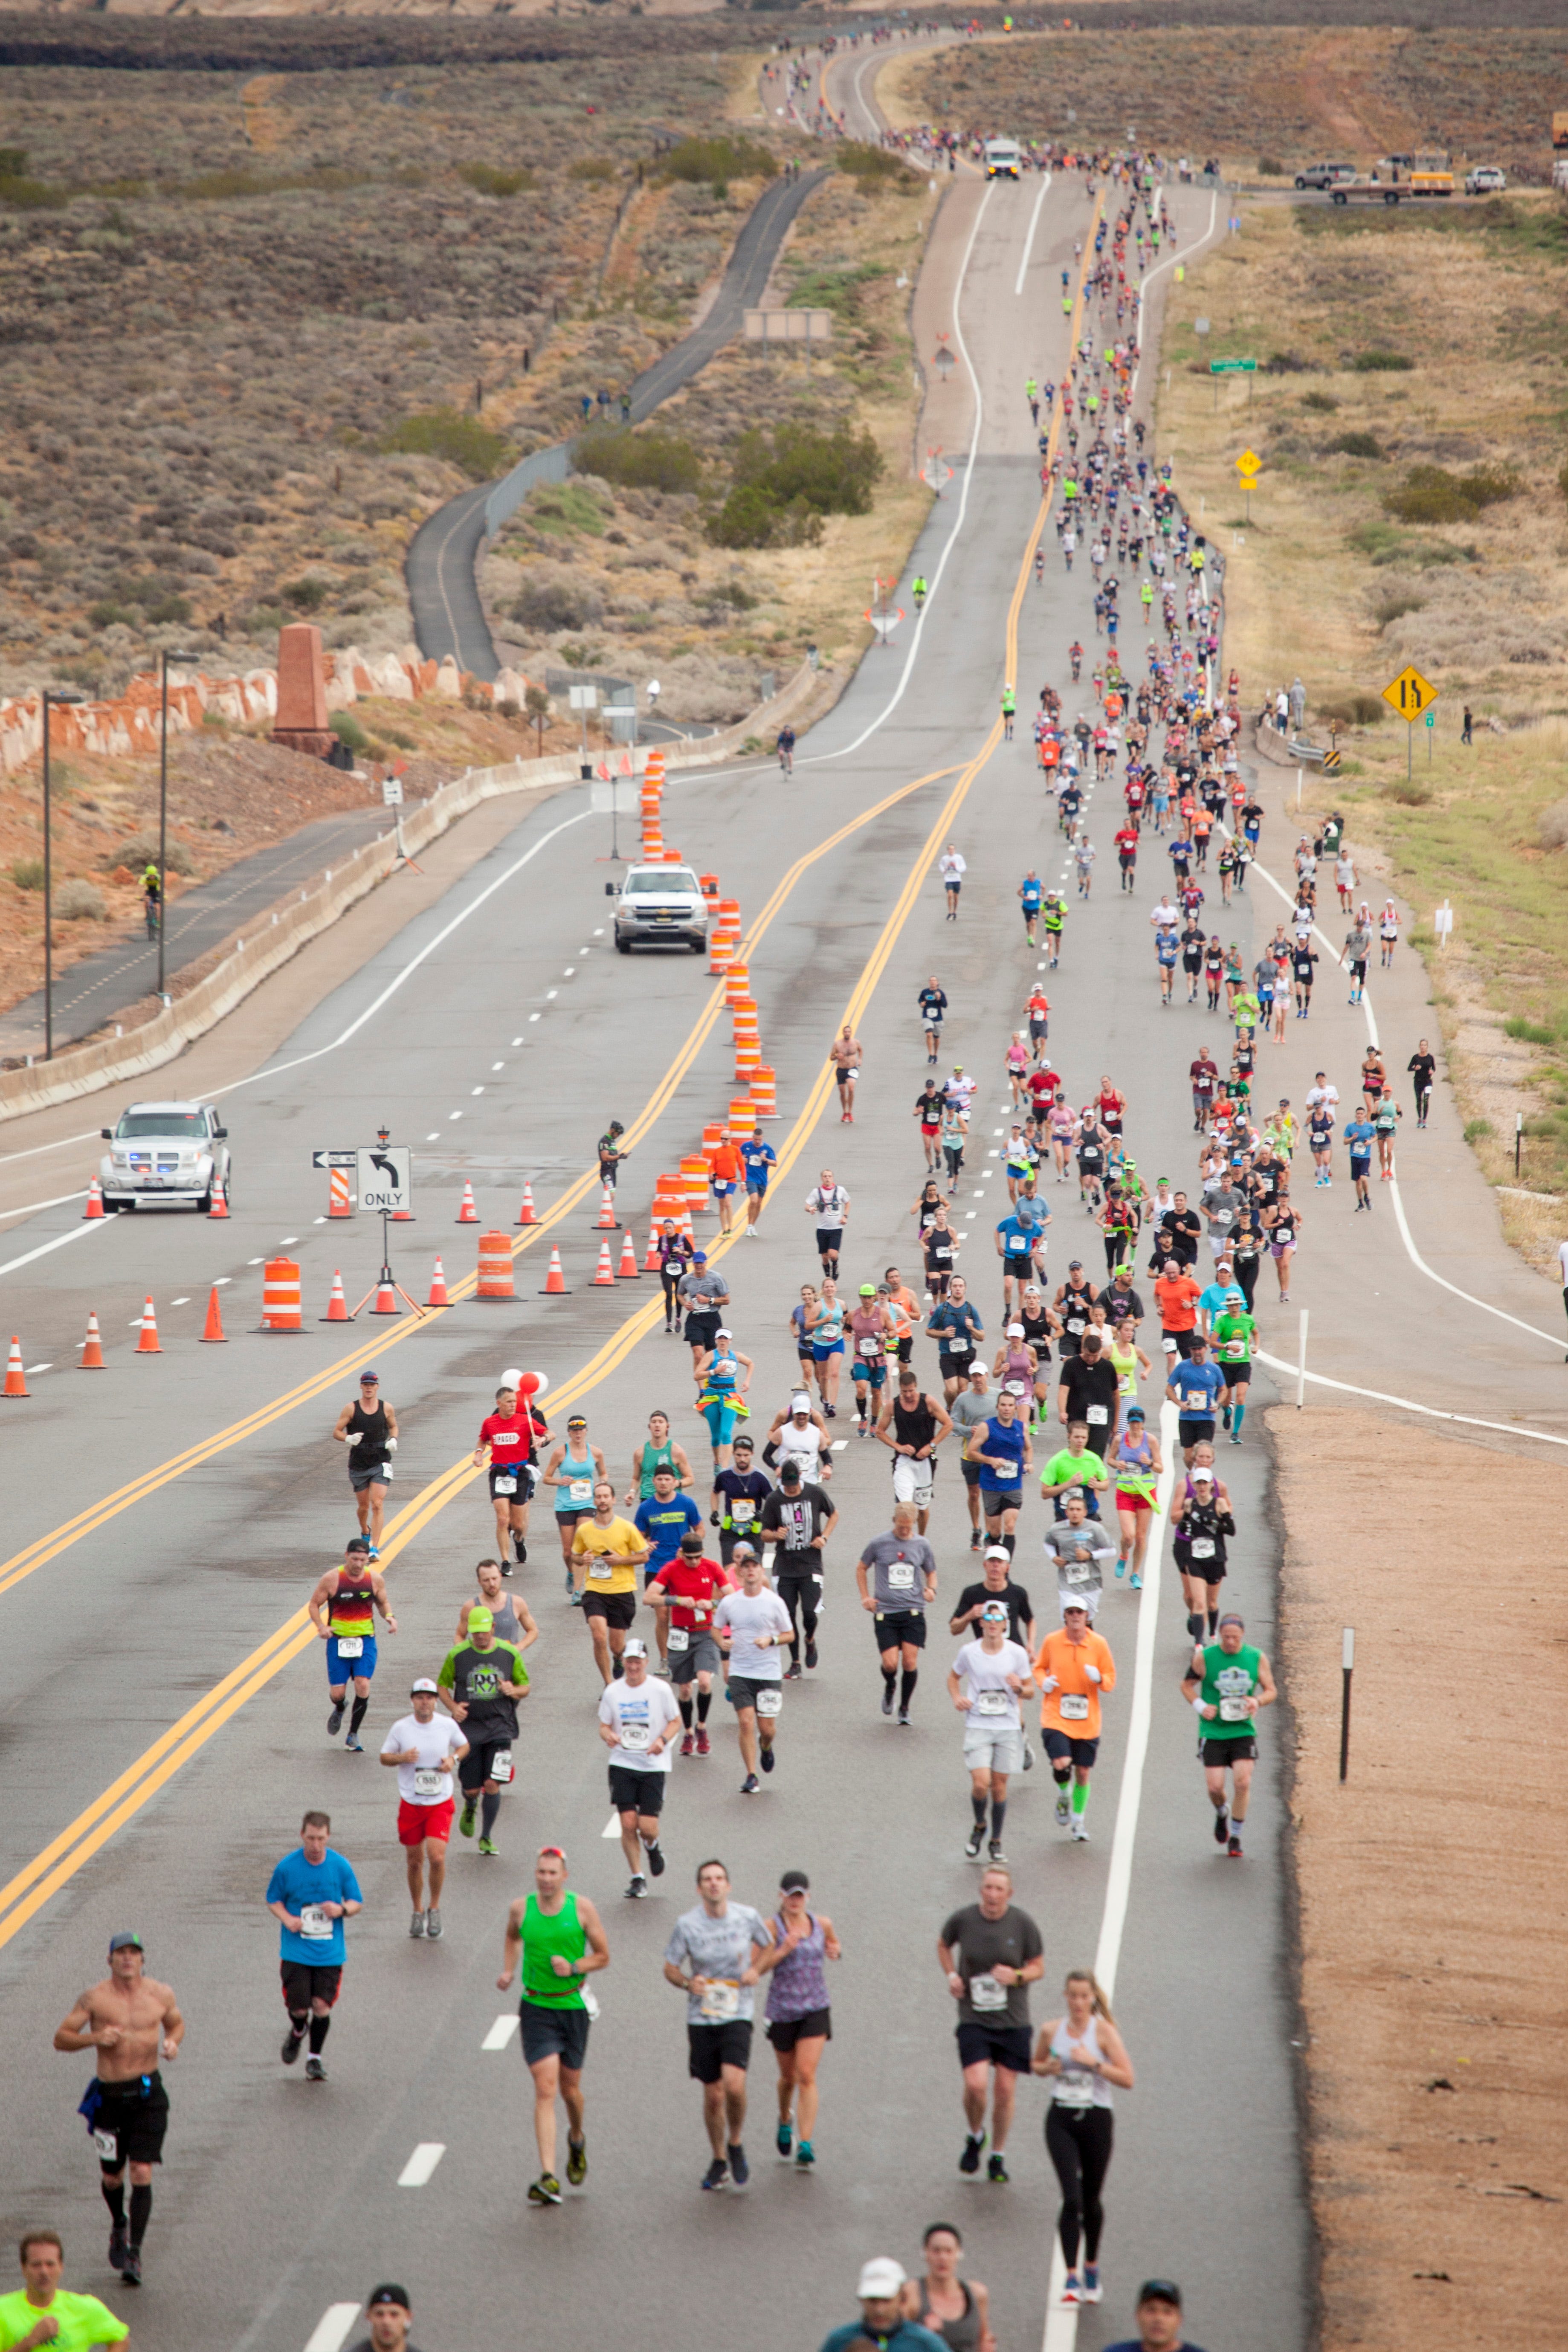 Be a volunteer, get the St. Marathon experience without all that